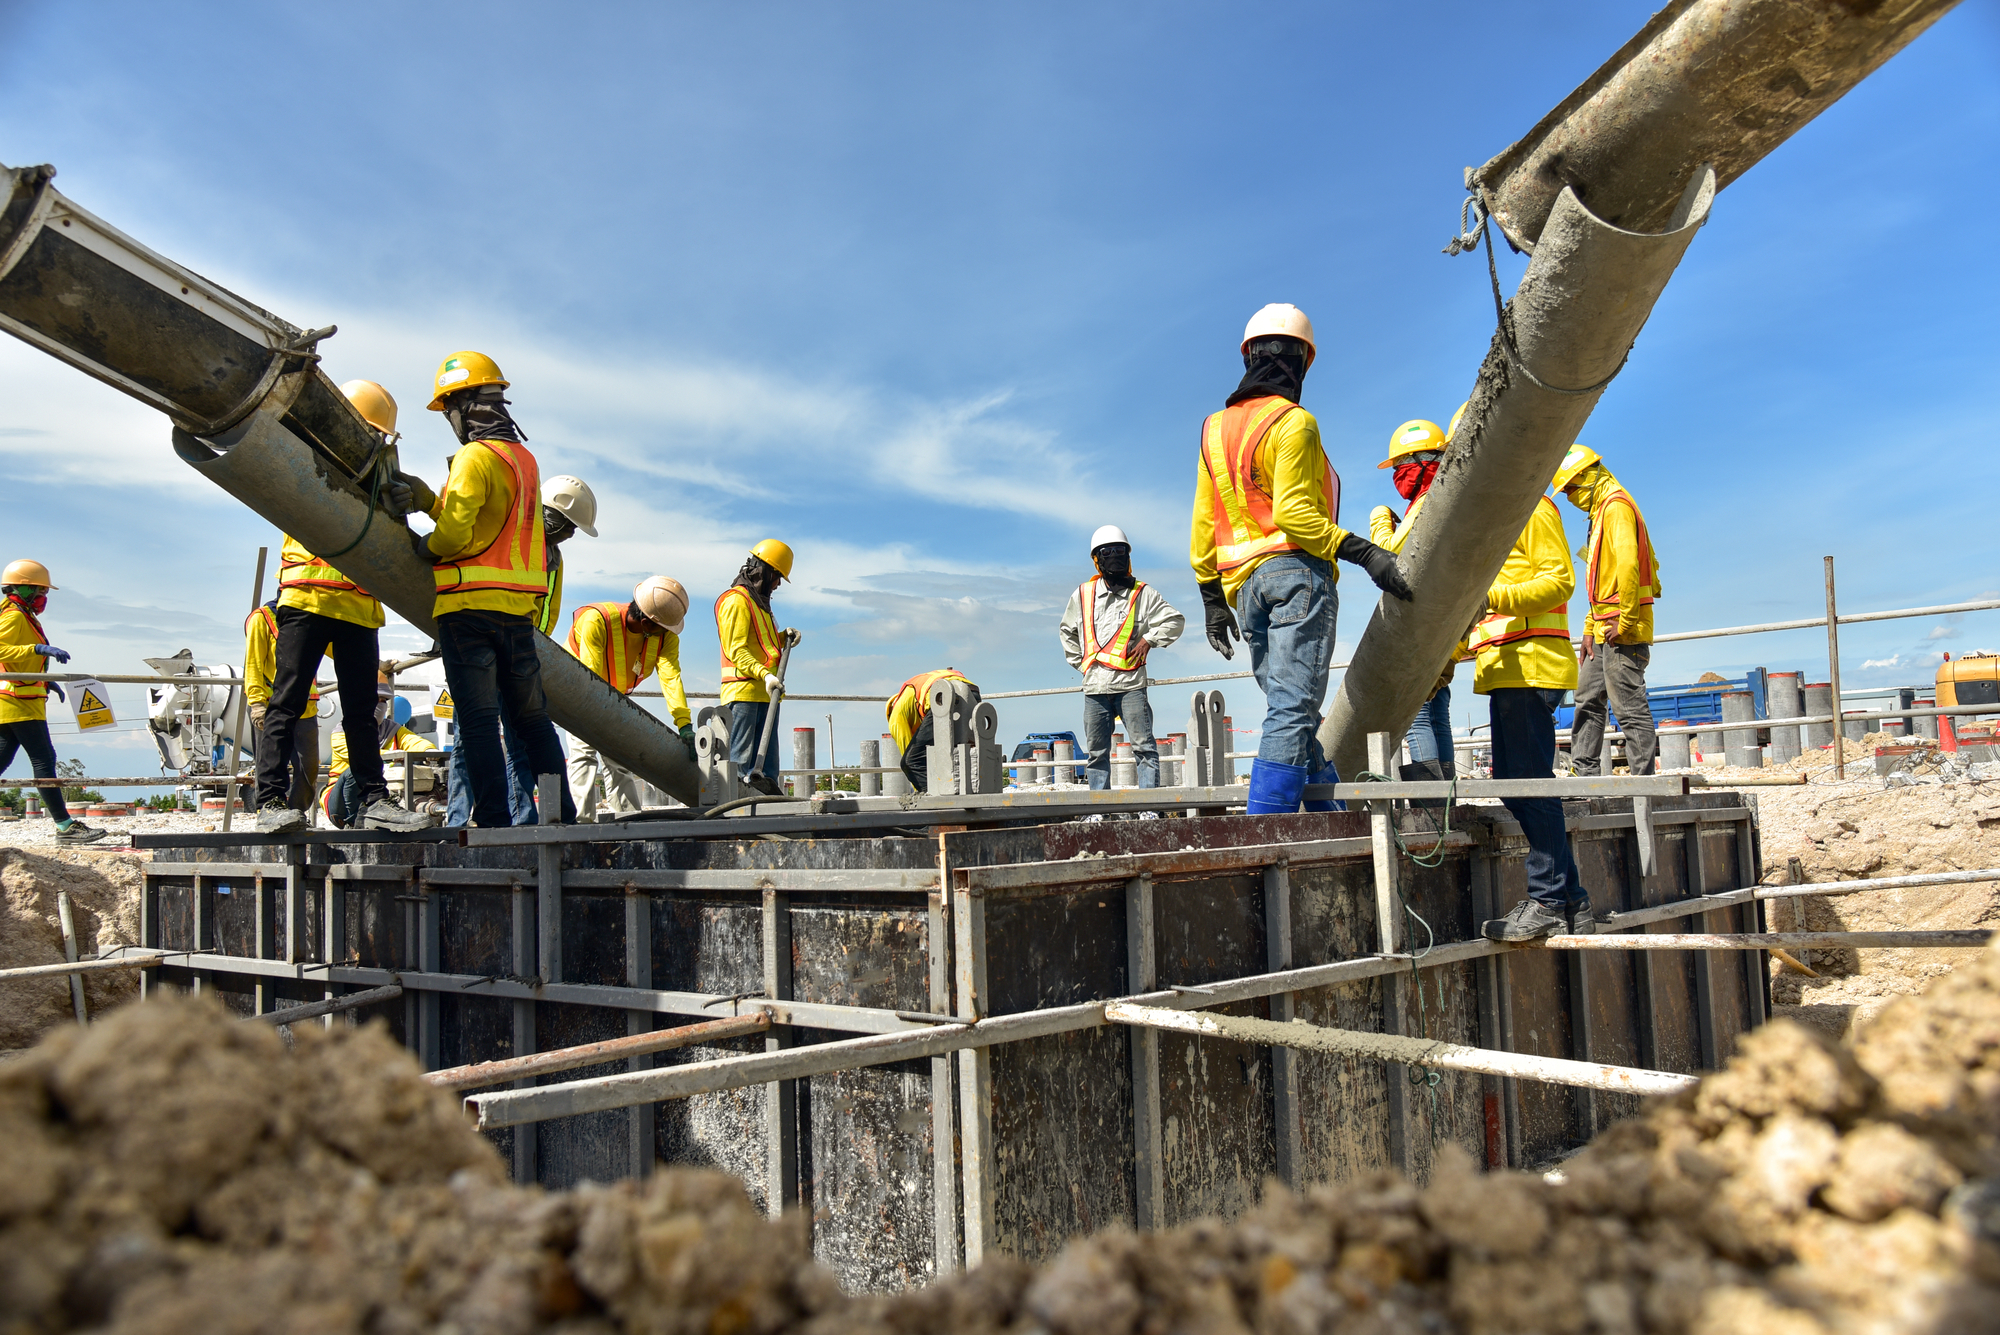 A Group Of Construction Workers Working On A Construction Site